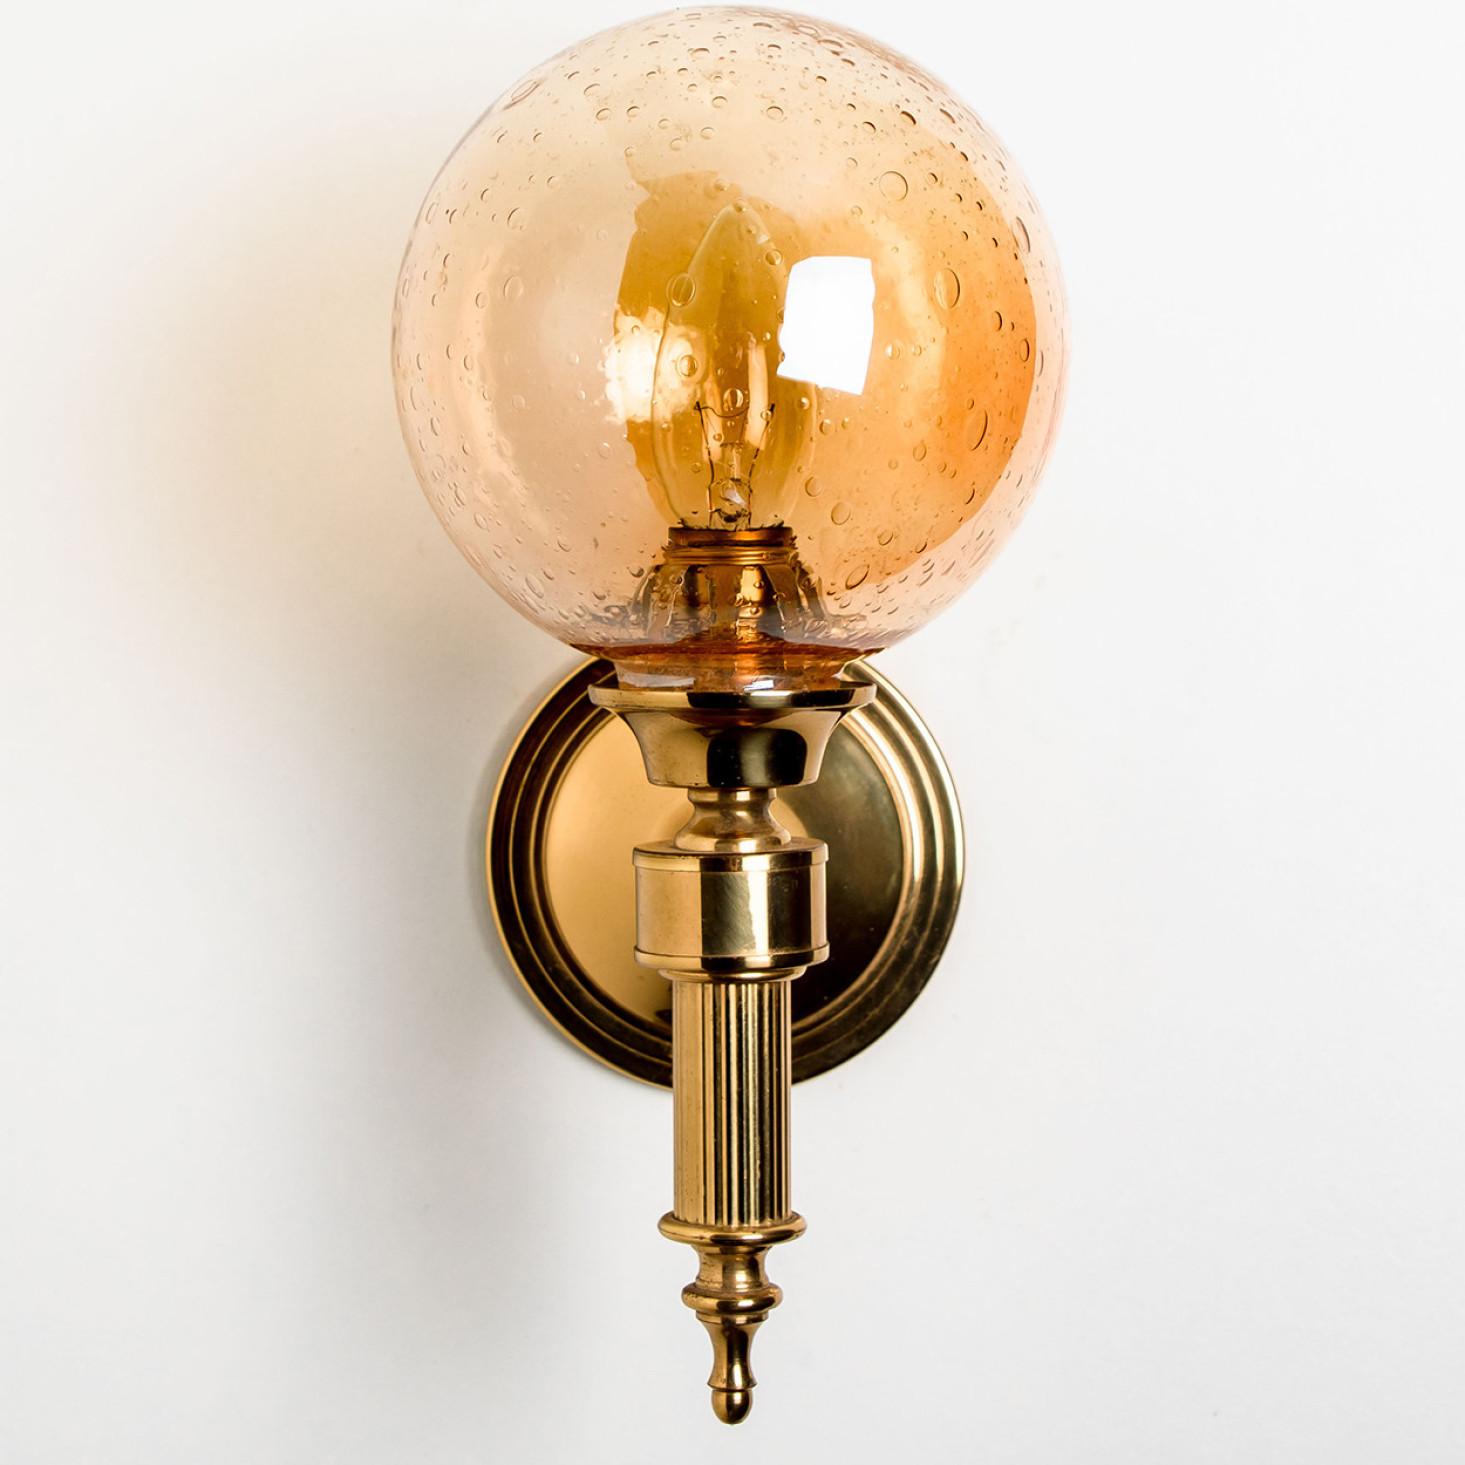 German Amber Glass and Brass Wall Lamps in the Style of Glashütte Limburg, 1975 For Sale